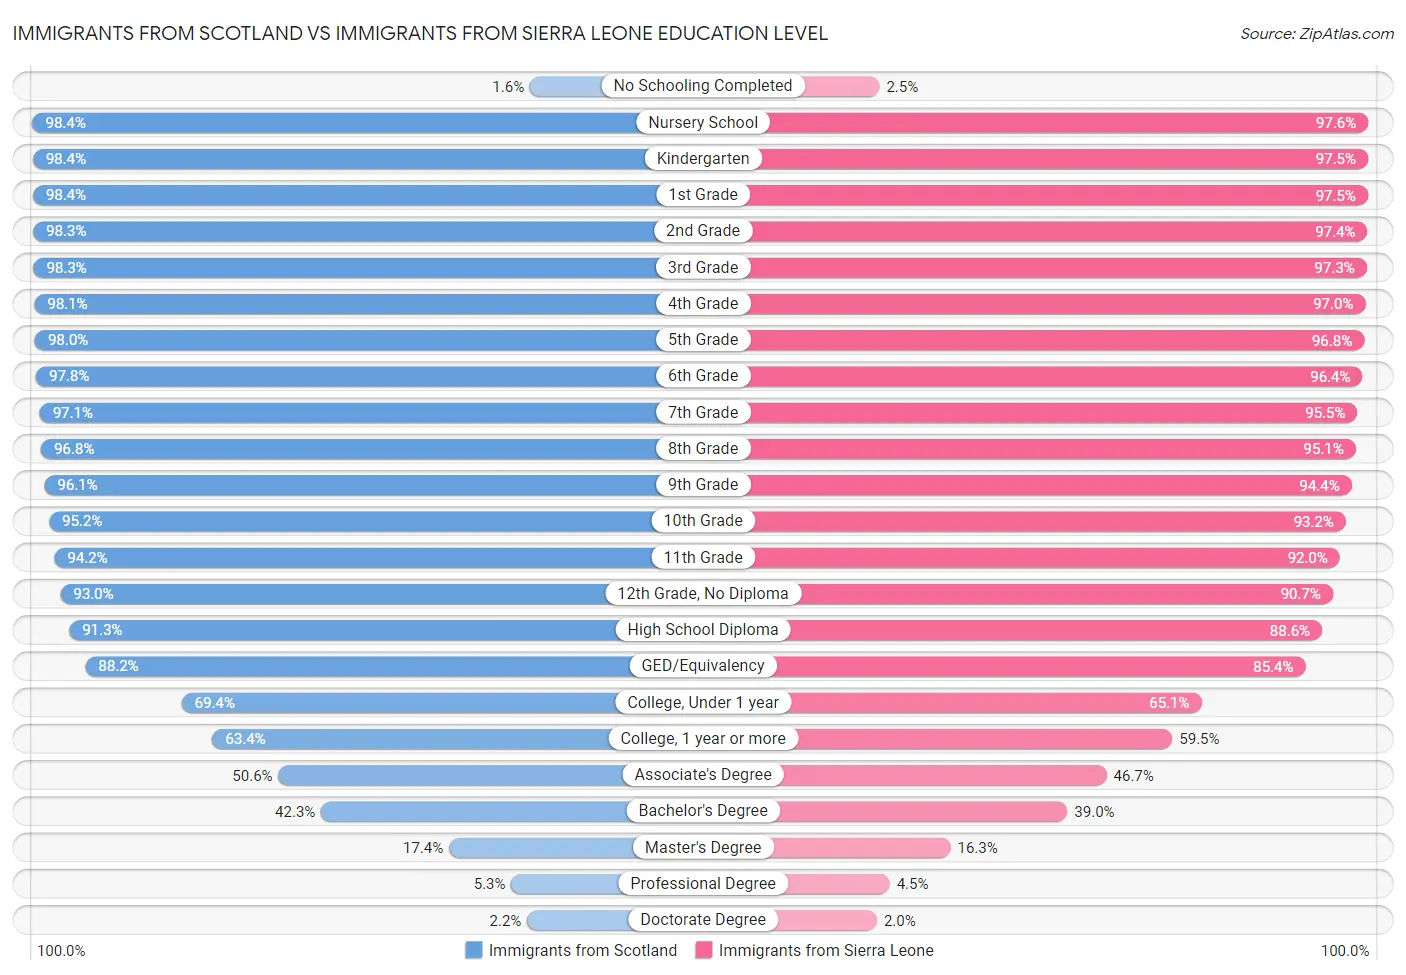 Immigrants from Scotland vs Immigrants from Sierra Leone Education Level